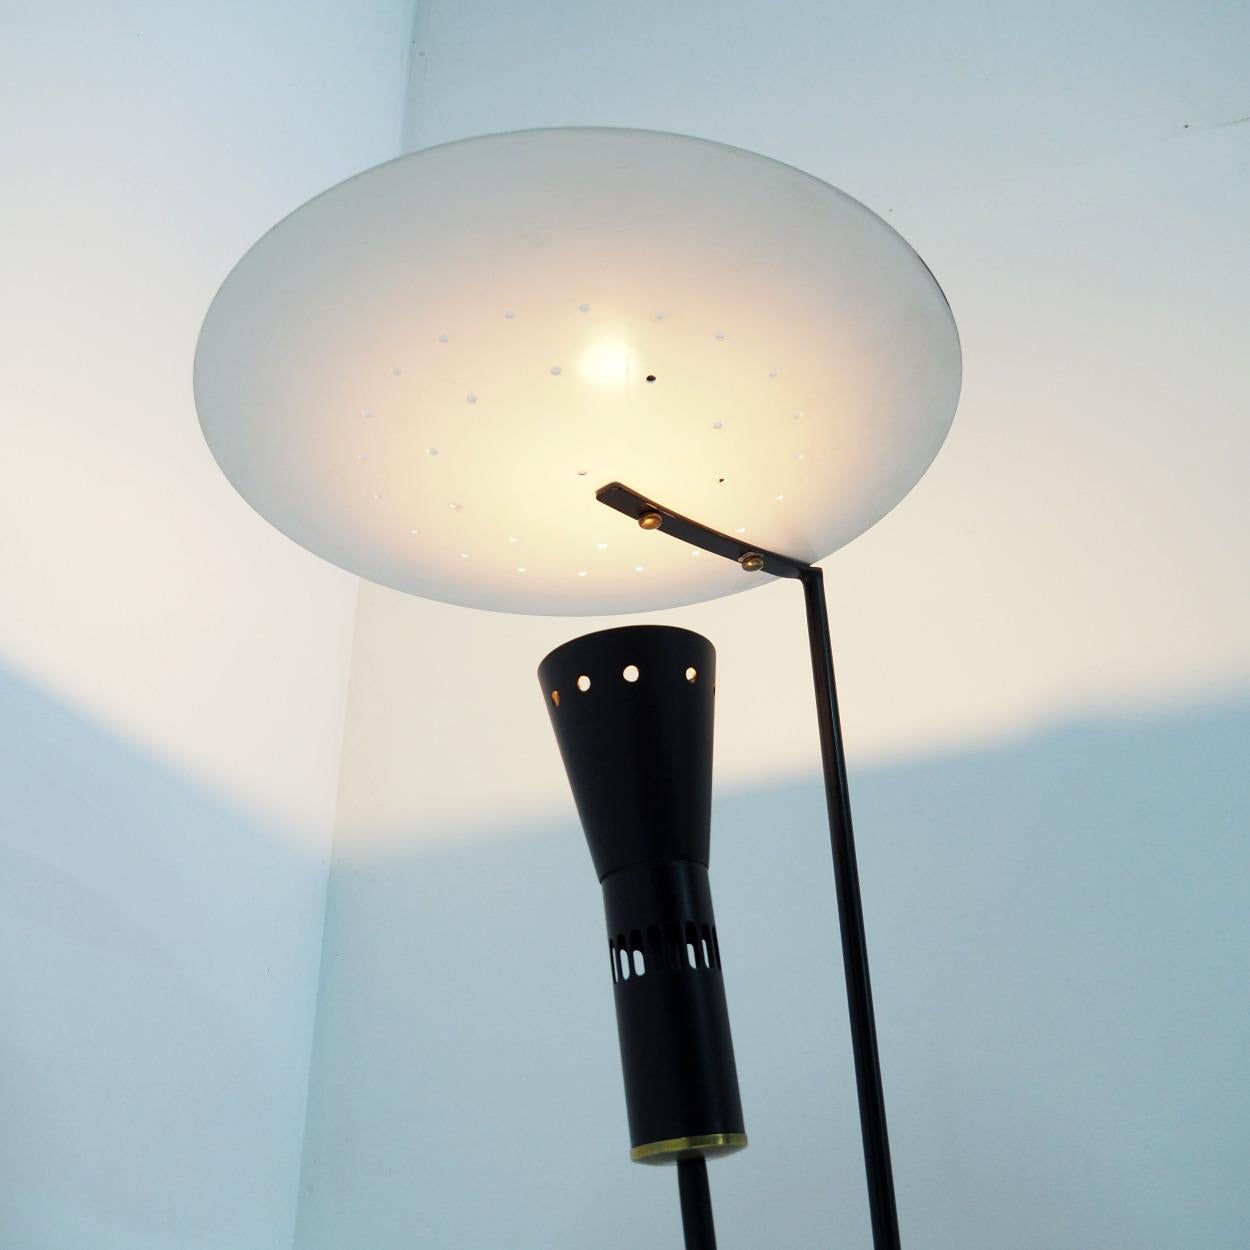 Mid-Century Modern Floor lamp in the style of the ‘B211’ lamp by Michel Buffet. For Sale